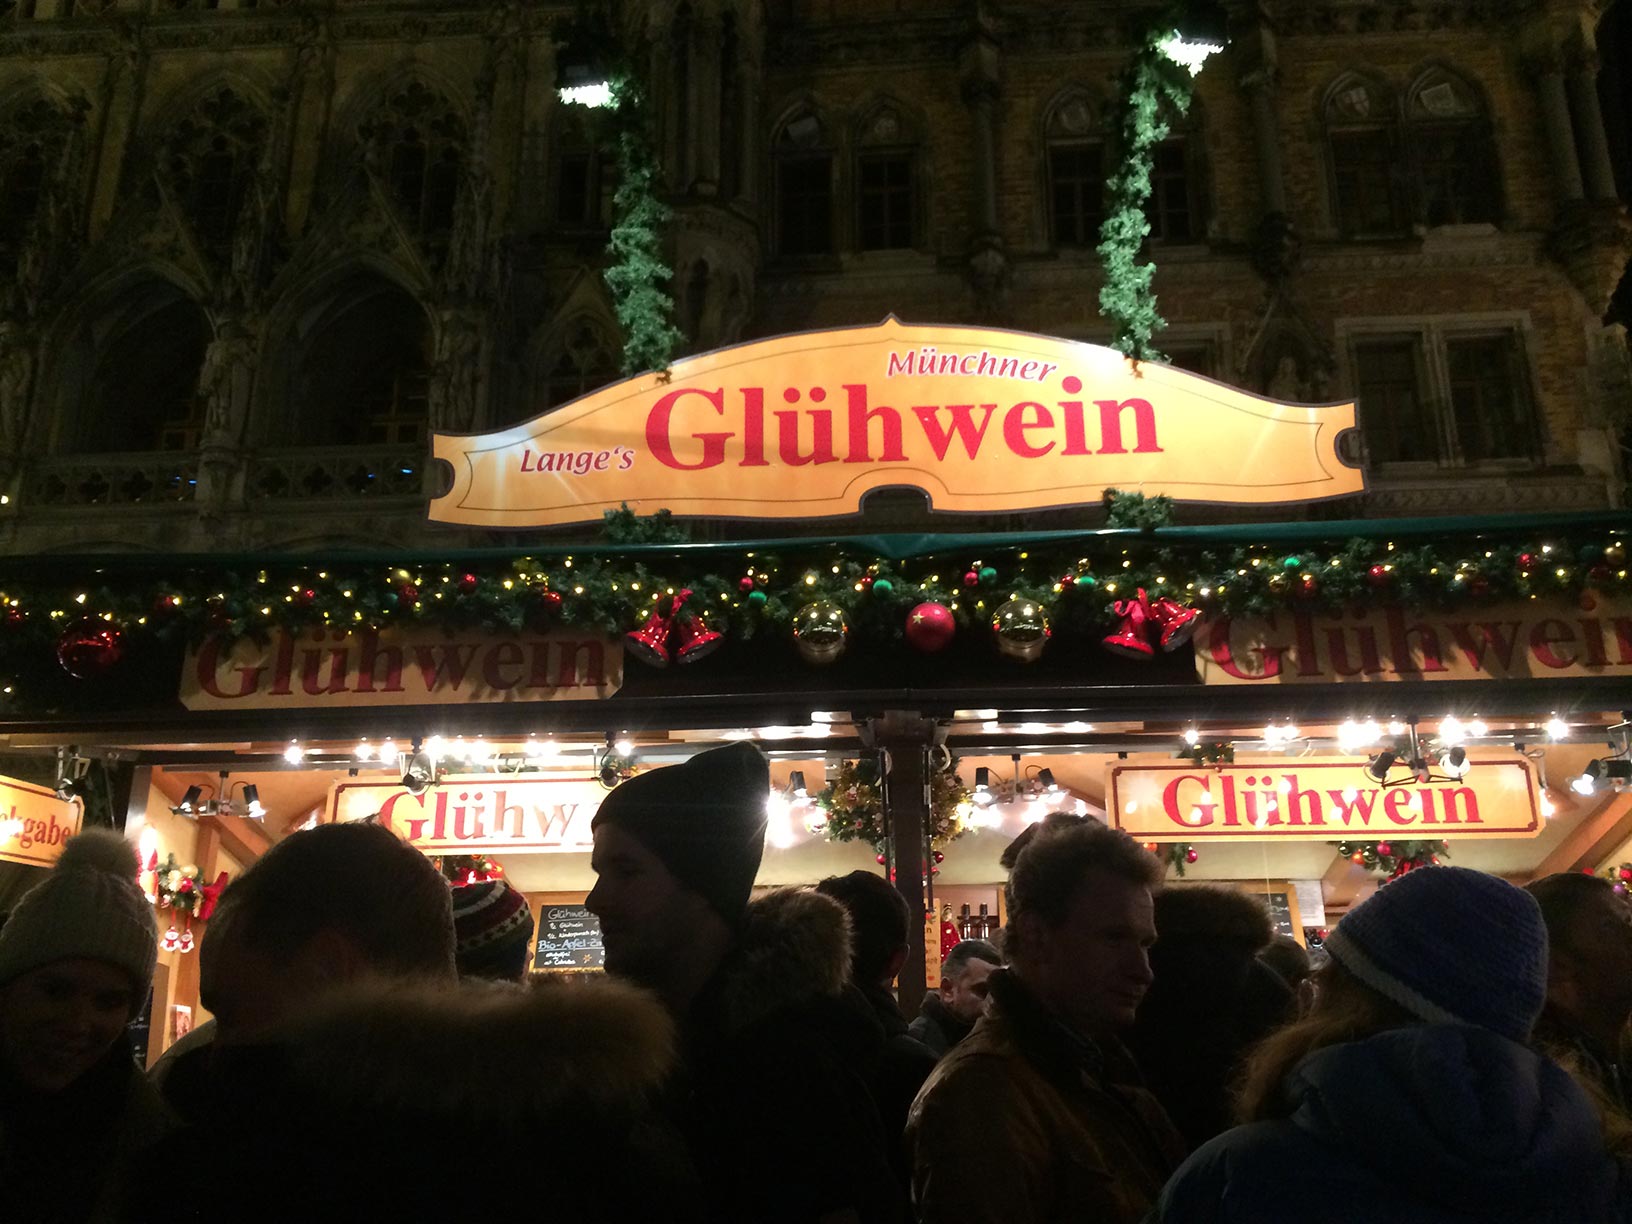 A gluhwein sign at a Christmas market in Munich, Germany.